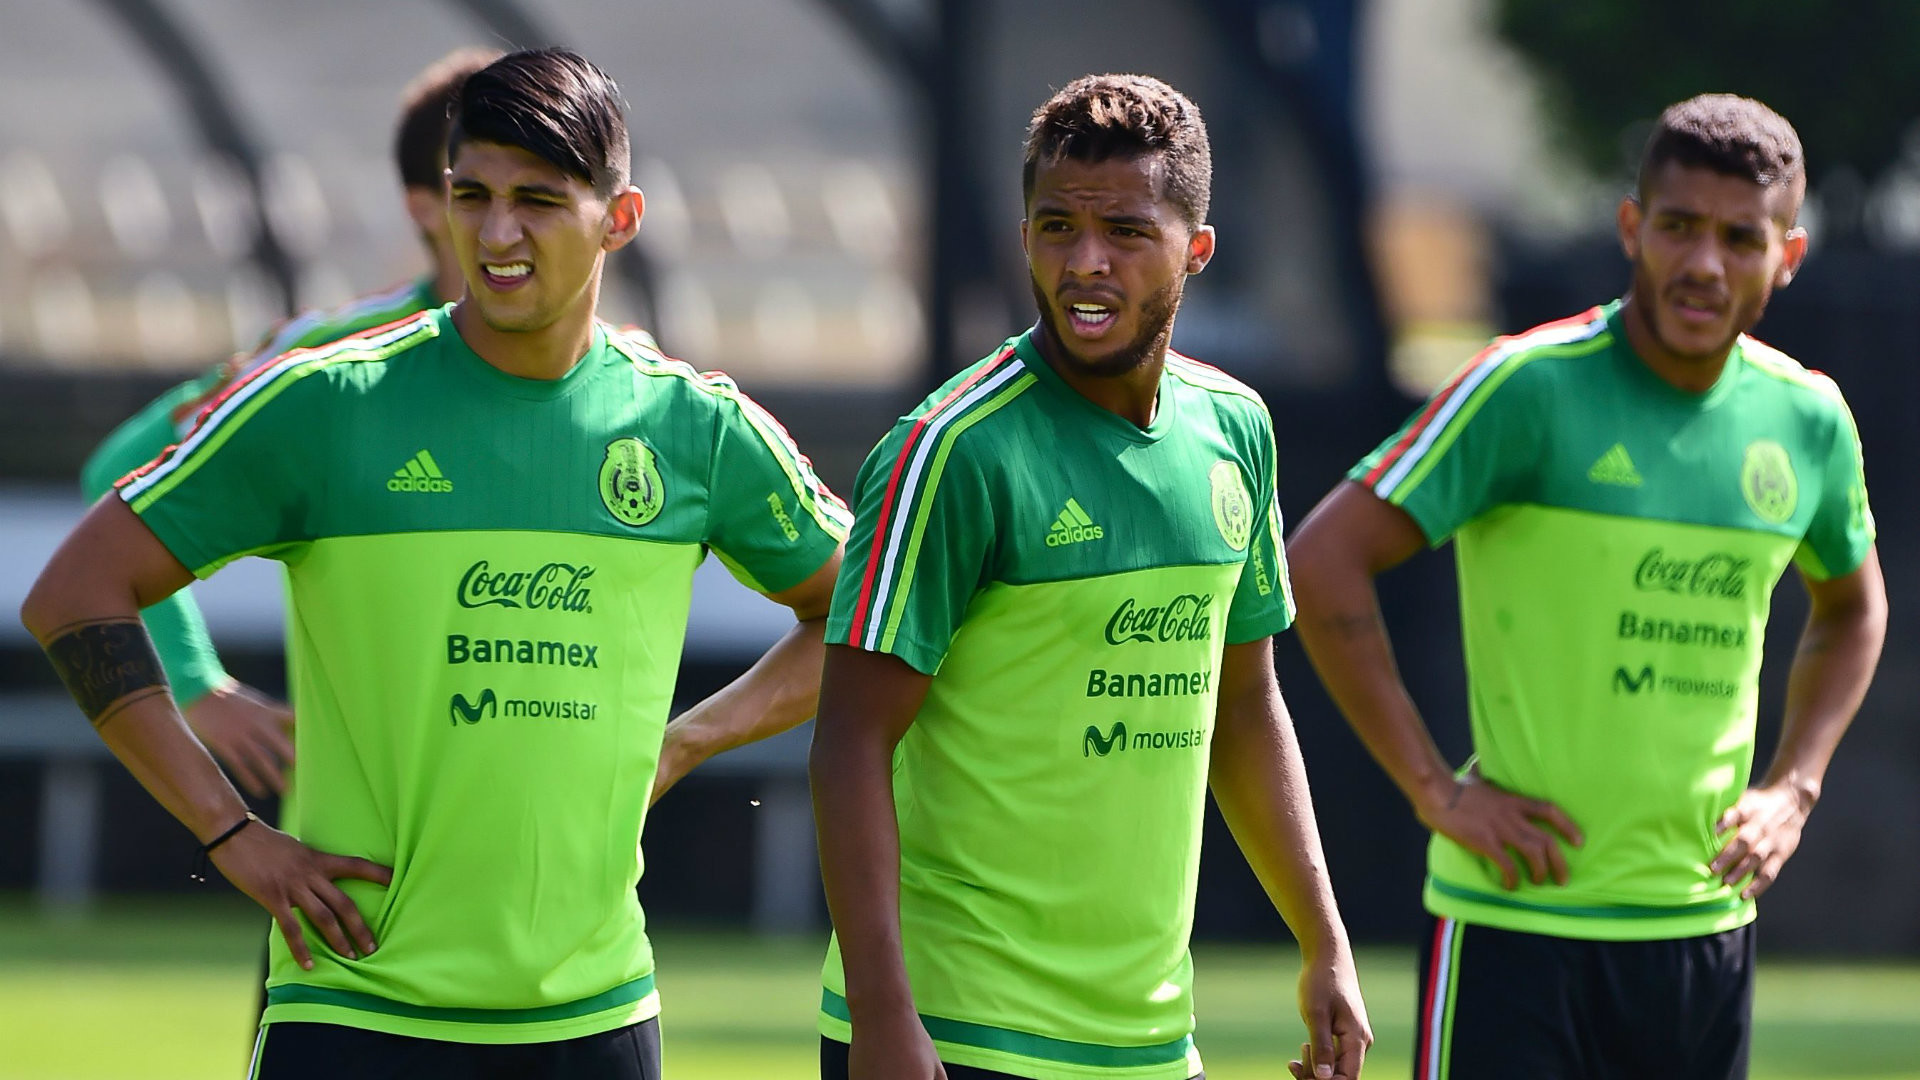 1920x1080 Mexico's 'prodigals' could boost morale ahead of Hex